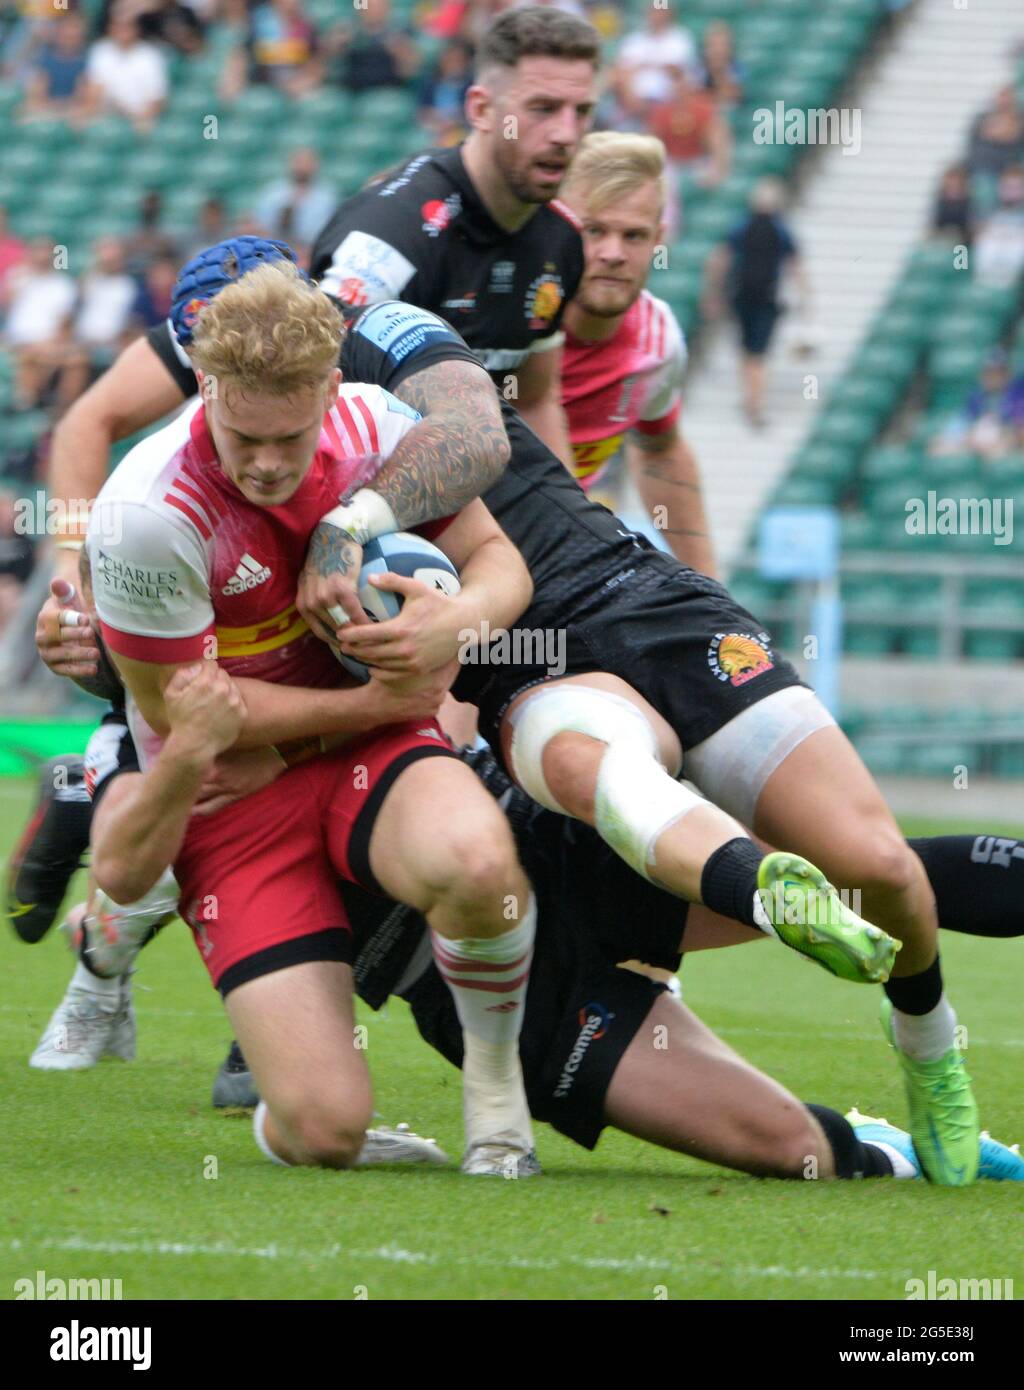 Gallagher Premiership Rugby Final Exeter Vs Harlequin at RFU Twickenham Stadium, UK. 26th June, 2021. Credit: Leo Mason Alamy News & Sport. Action during the match which was won by Harlequins 40-38 Credit: Leo Mason sports/Alamy Live News Stock Photo